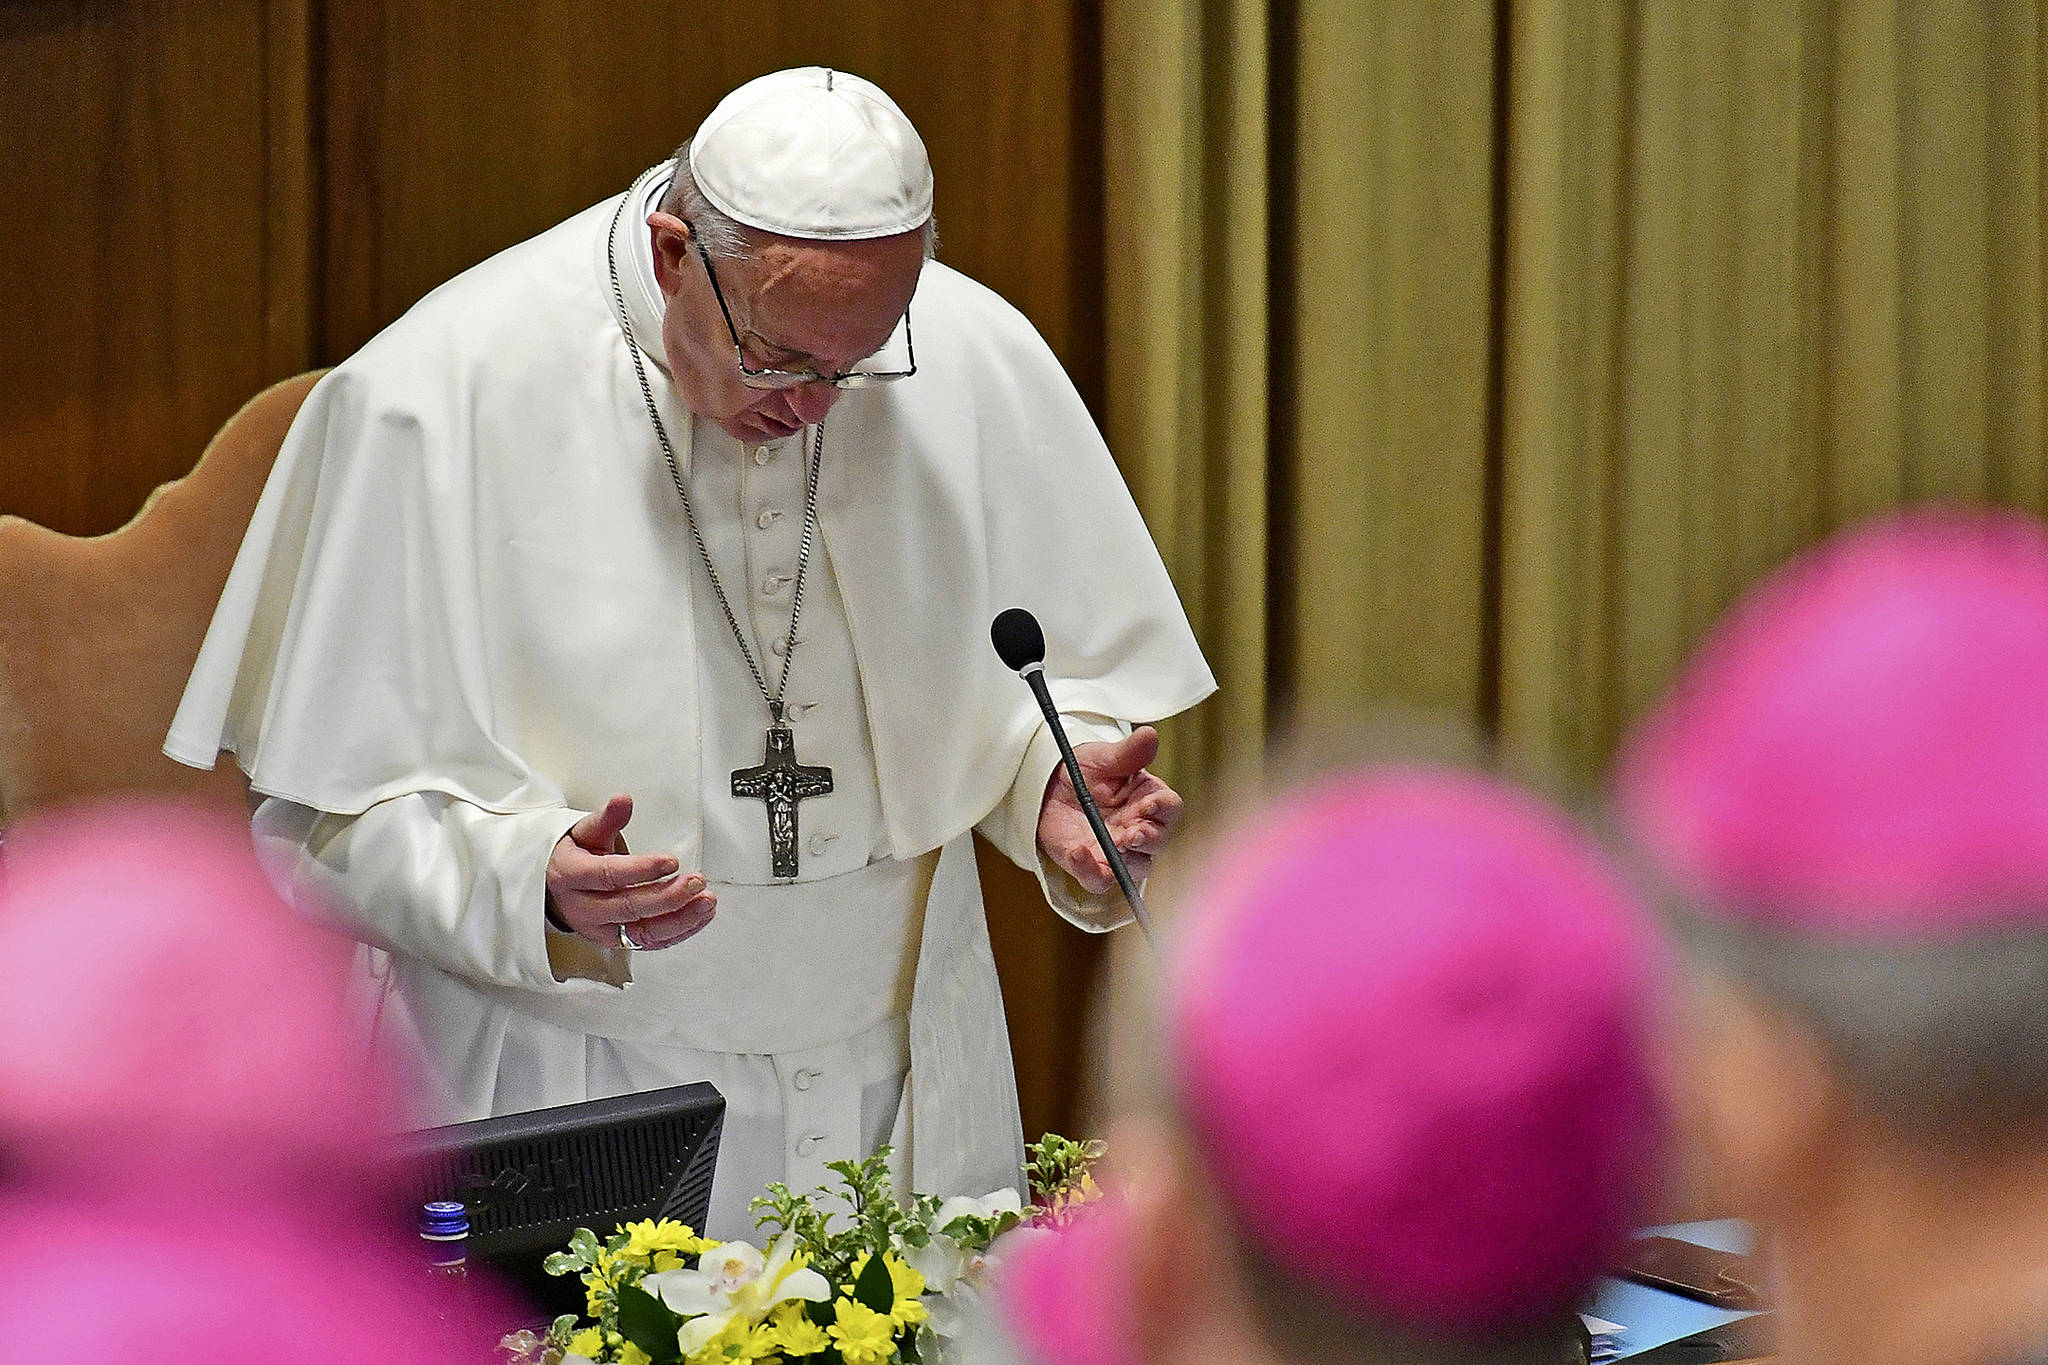 Pope Francis prays at the opening of a sex abuse prevention summit, at the Vatican, Thursday, Feb. 21, 2019. The gathering of church leaders from around the globe is taking place amid intense scrutiny of the Catholic Church’s record after new allegations of abuse and cover-up last year sparked a credibility crisis for the hierarchy. (Vincenzo Pinto/Pool Photo via AP)